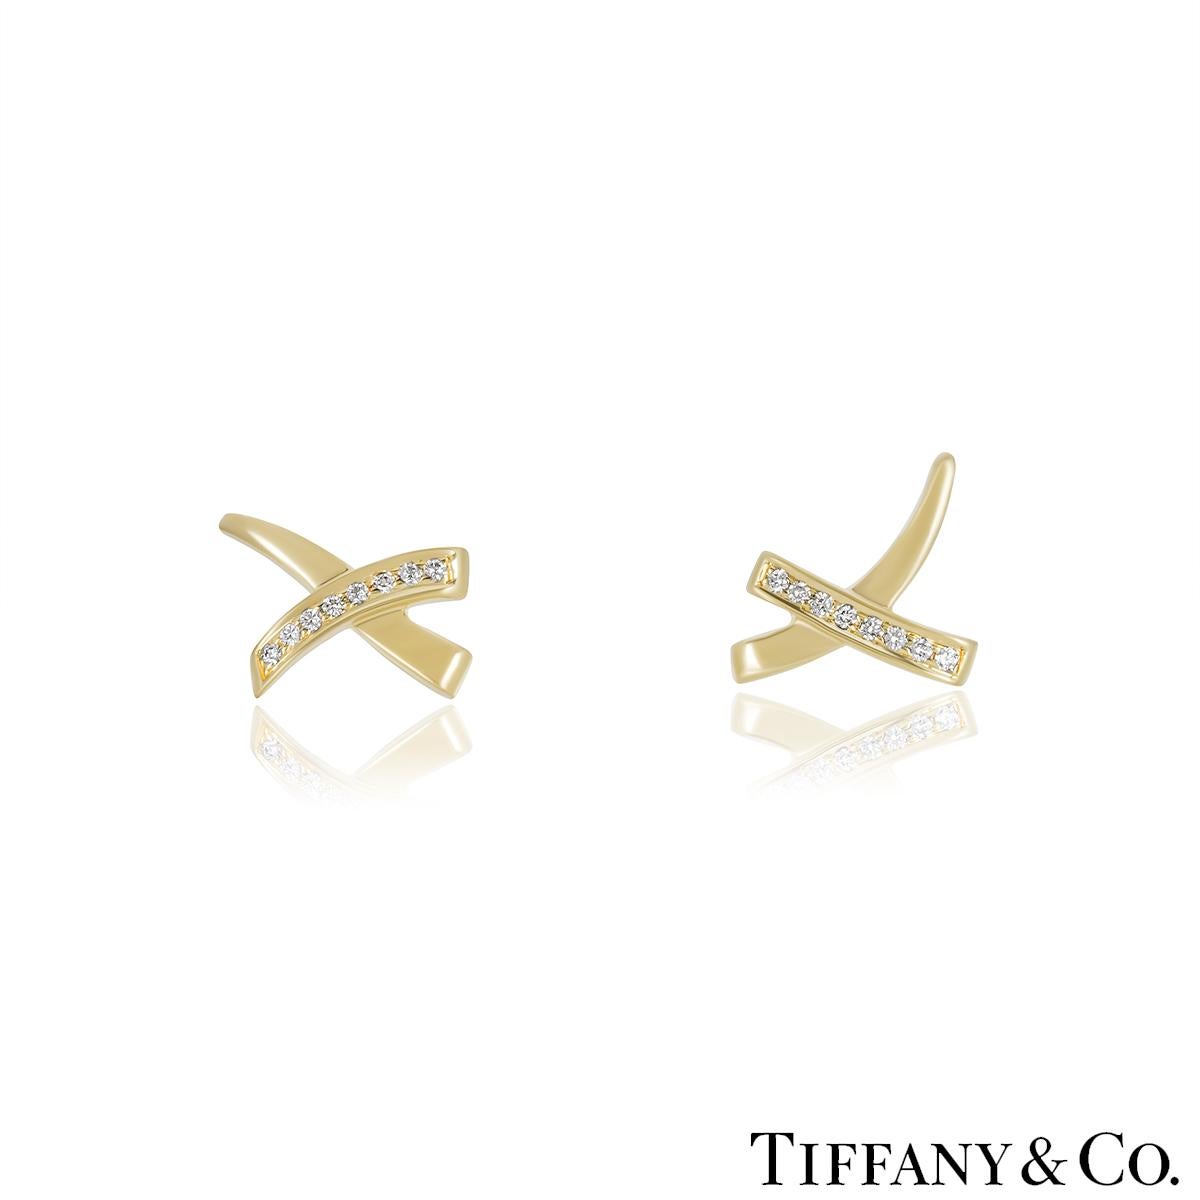 A signature 18k yellow gold diamond jewellery suite from Tiffany & Co. from the Paloma Picasso Graffiti collection. The earrings feature an X design and are pave set with 16 round brilliant cut diamonds with an approximate total weight of 0.12ct,